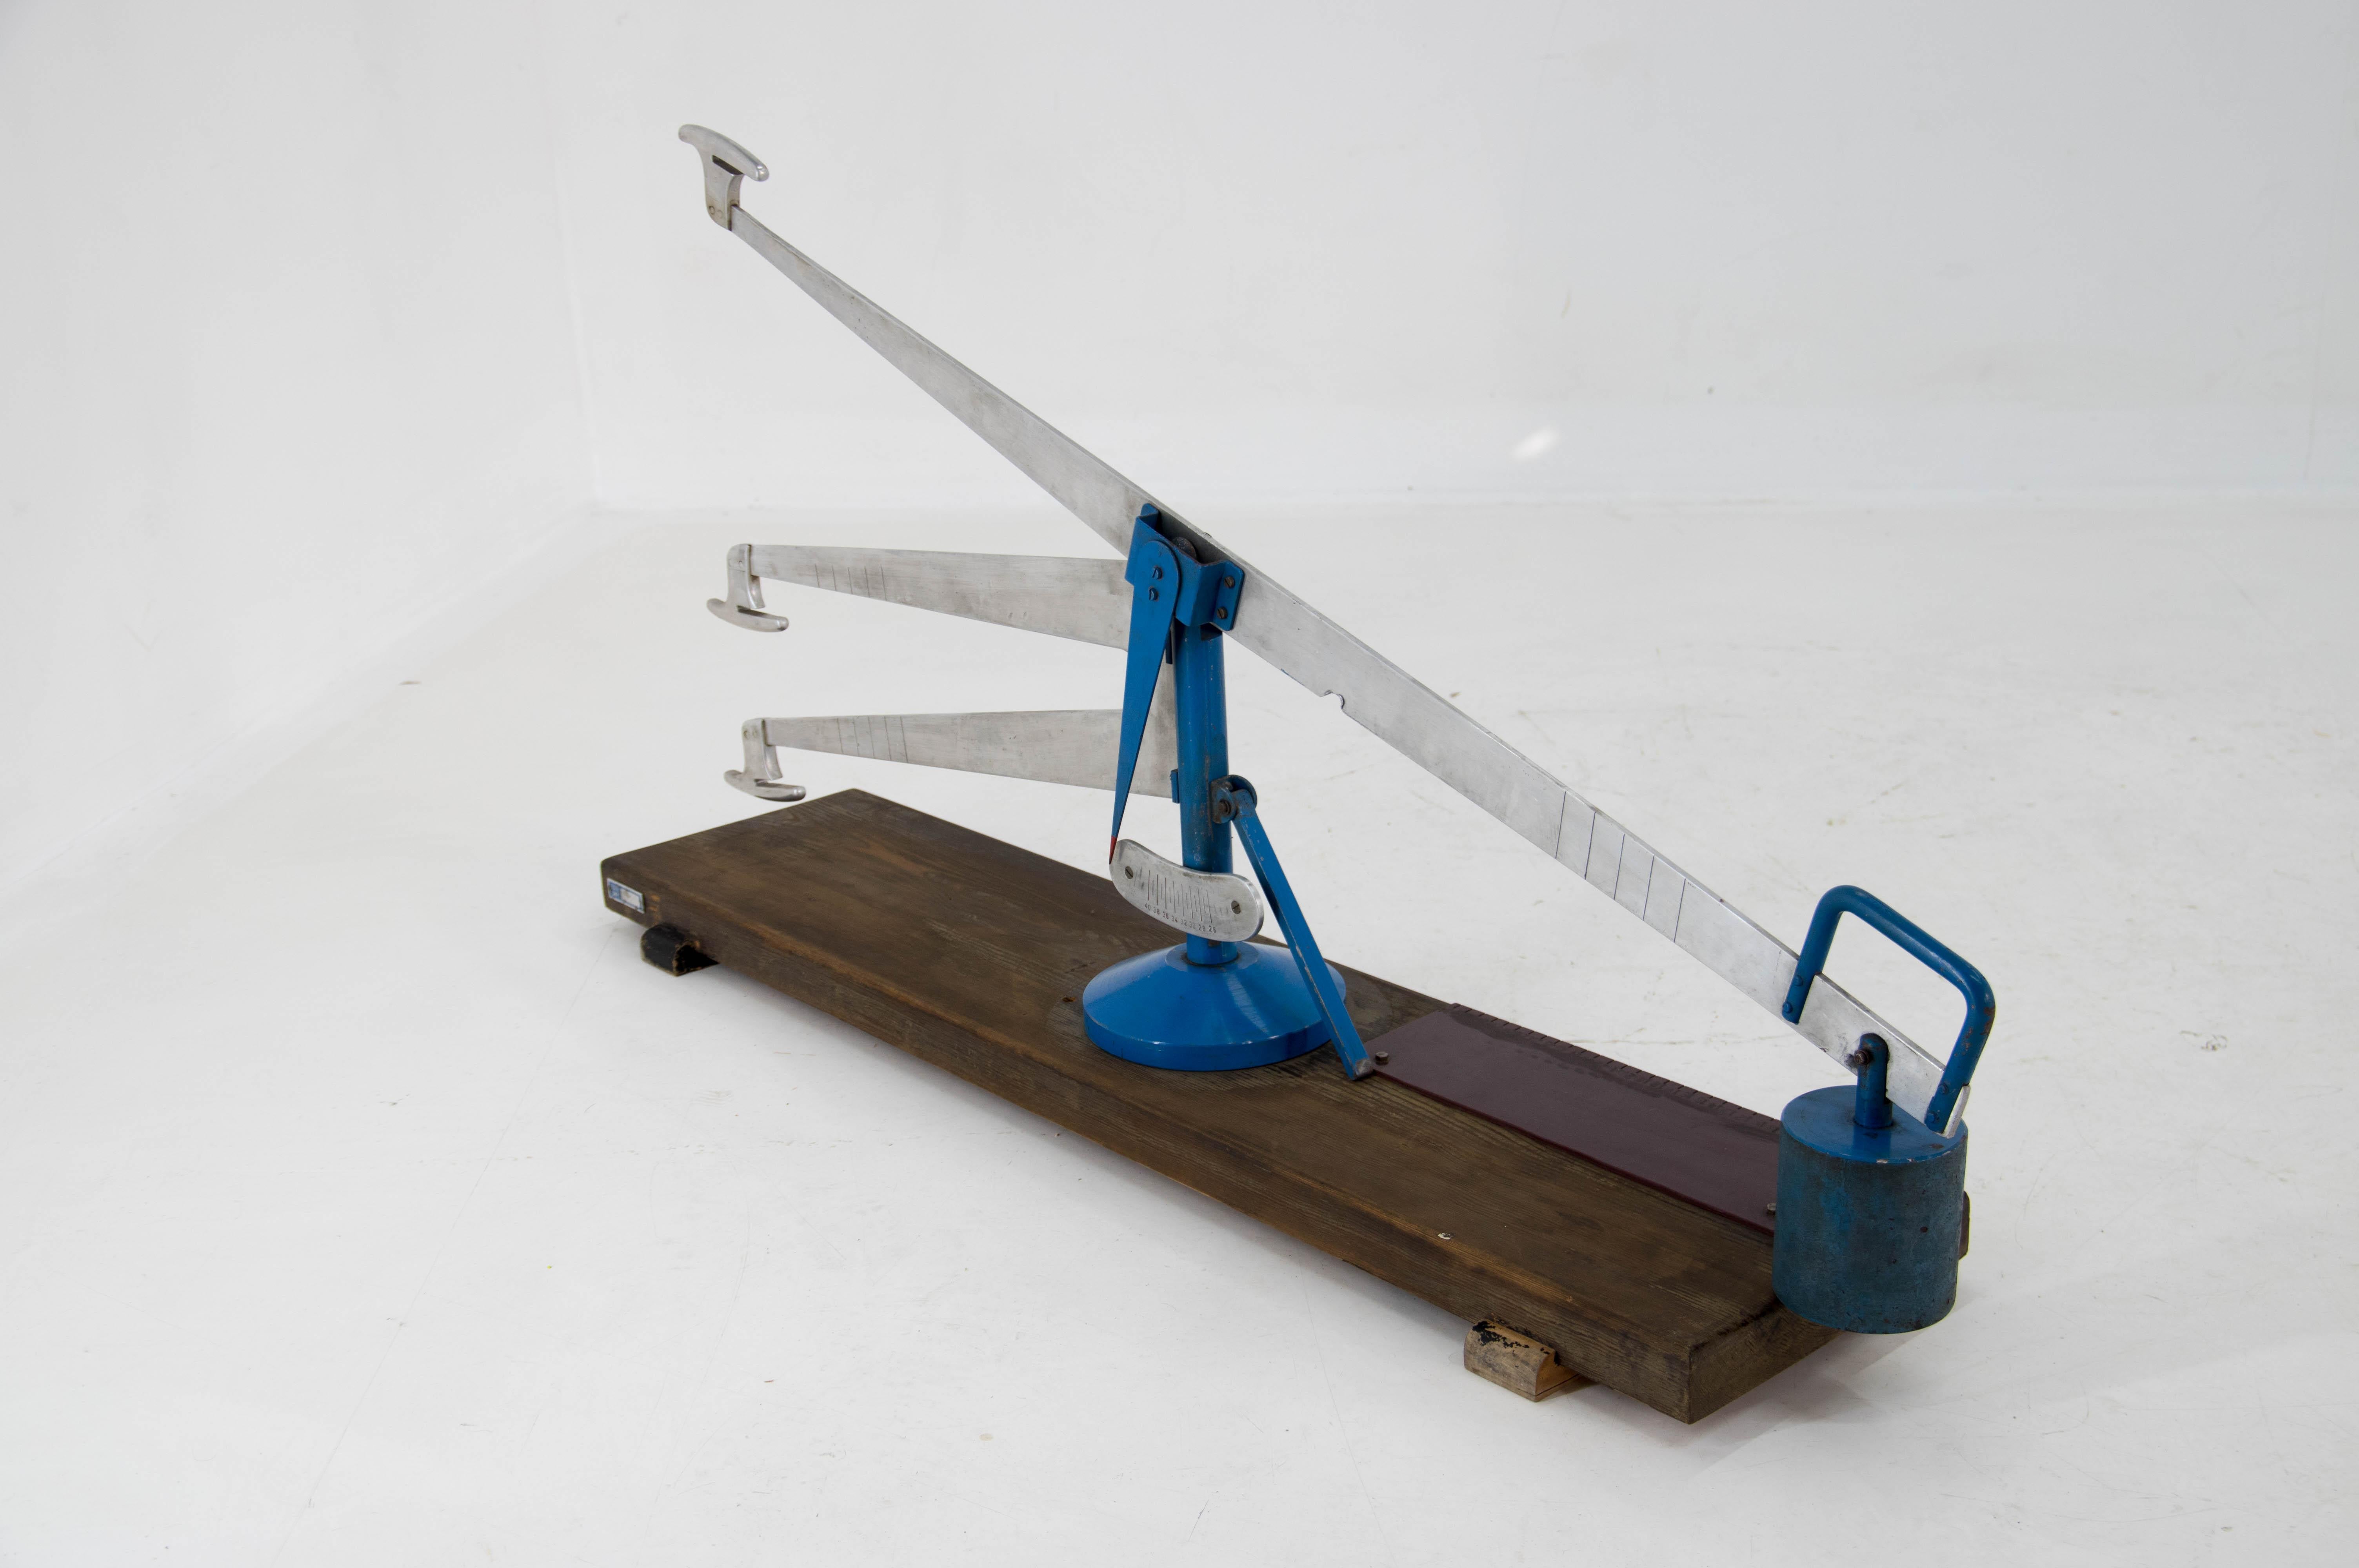 Equipment for Measuring the Elasticity of Pantyhouse, 1950er Jahre (Industriell) im Angebot